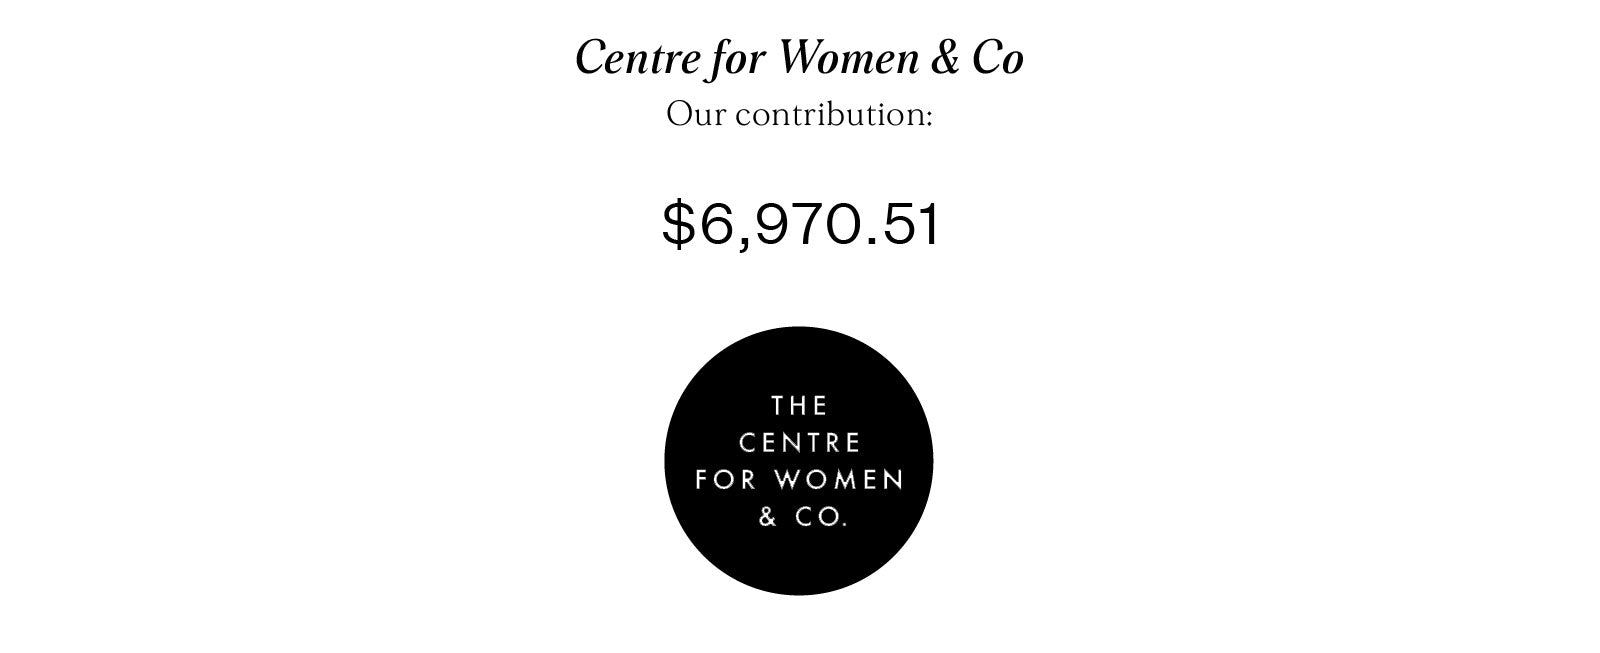 Centre for Women Co charity